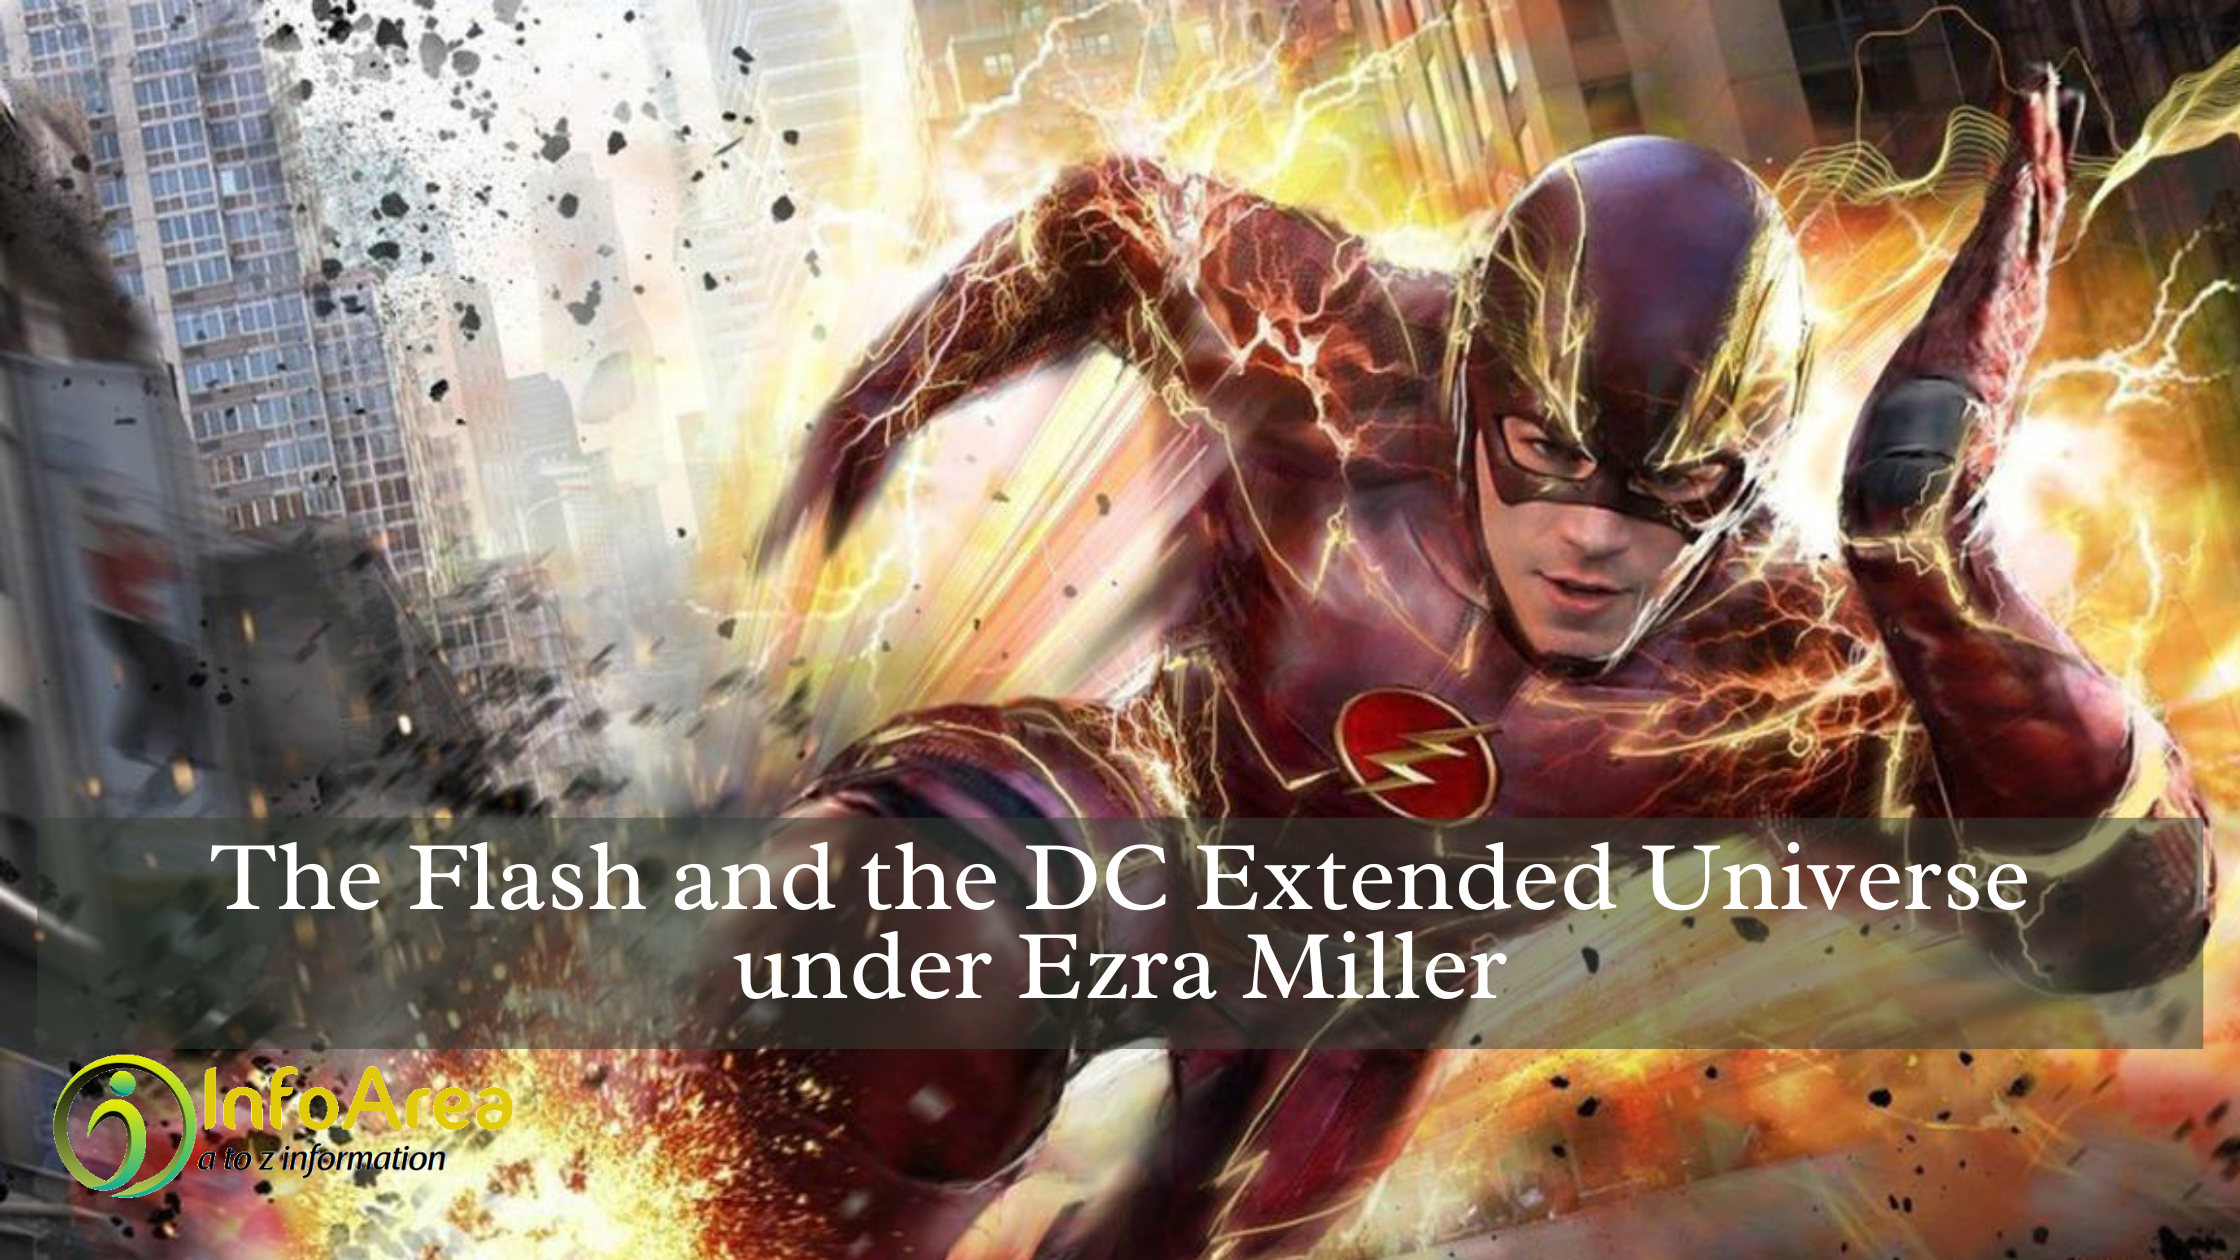 Future of The Flash and the DC Extended Universe under Ezra Miller